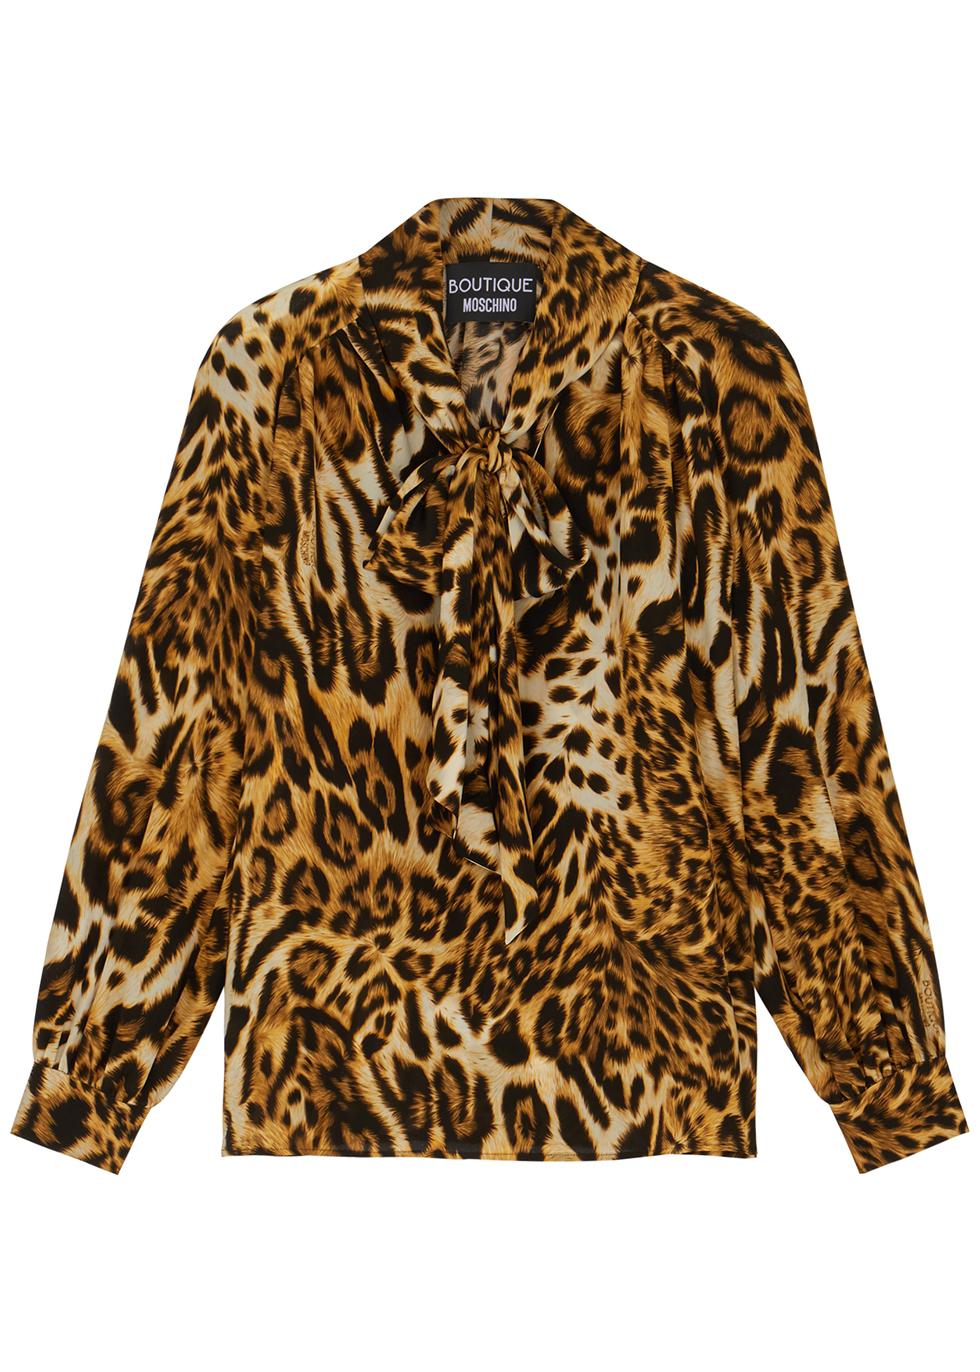 Leopard-print silk blouse by MOSCHINO